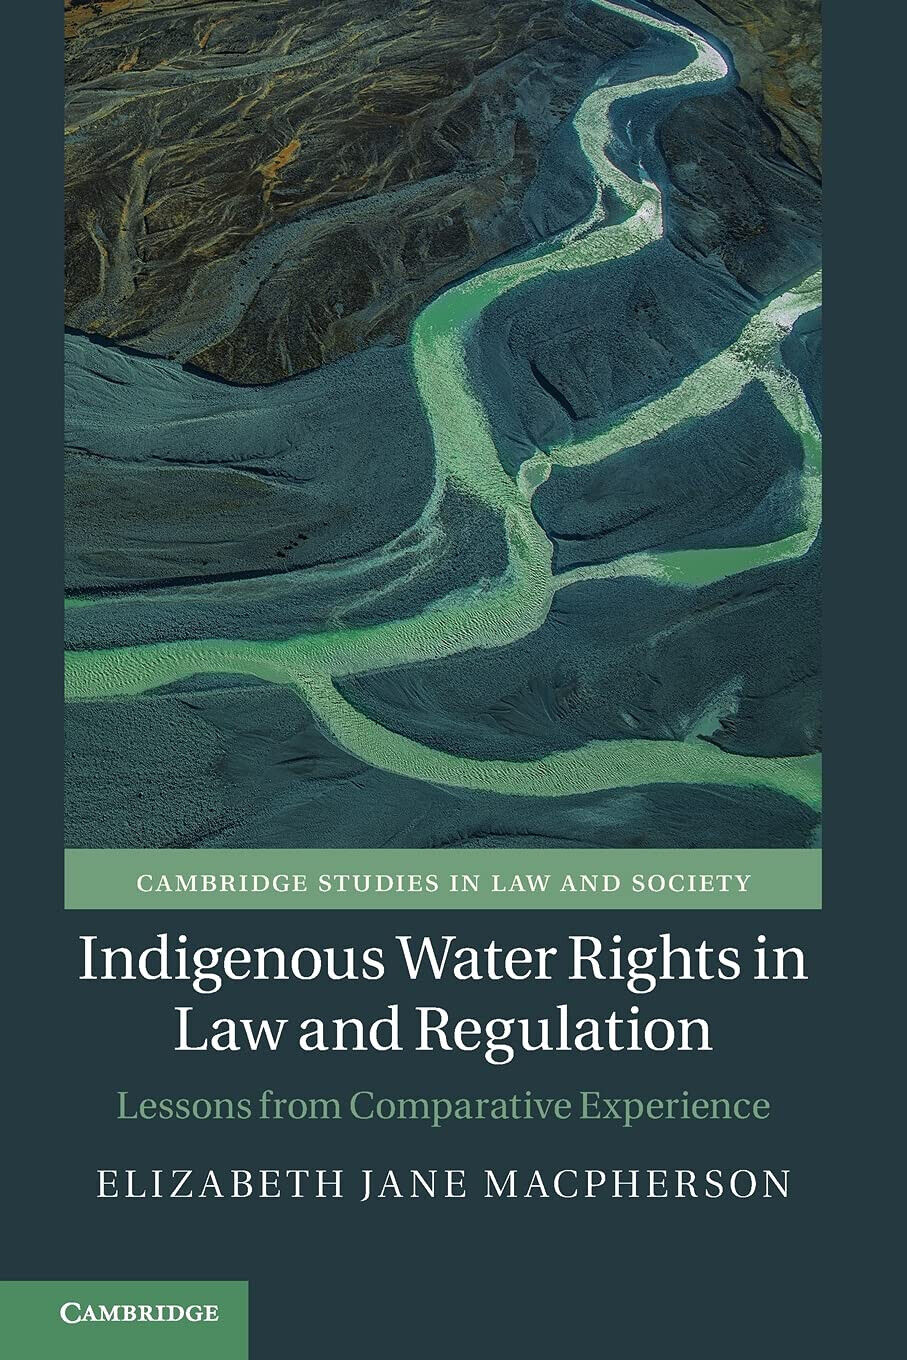 Indigenous Water Rights In Law And Regulation - Elizabeth Jane Macpherson - 2021 libro usato